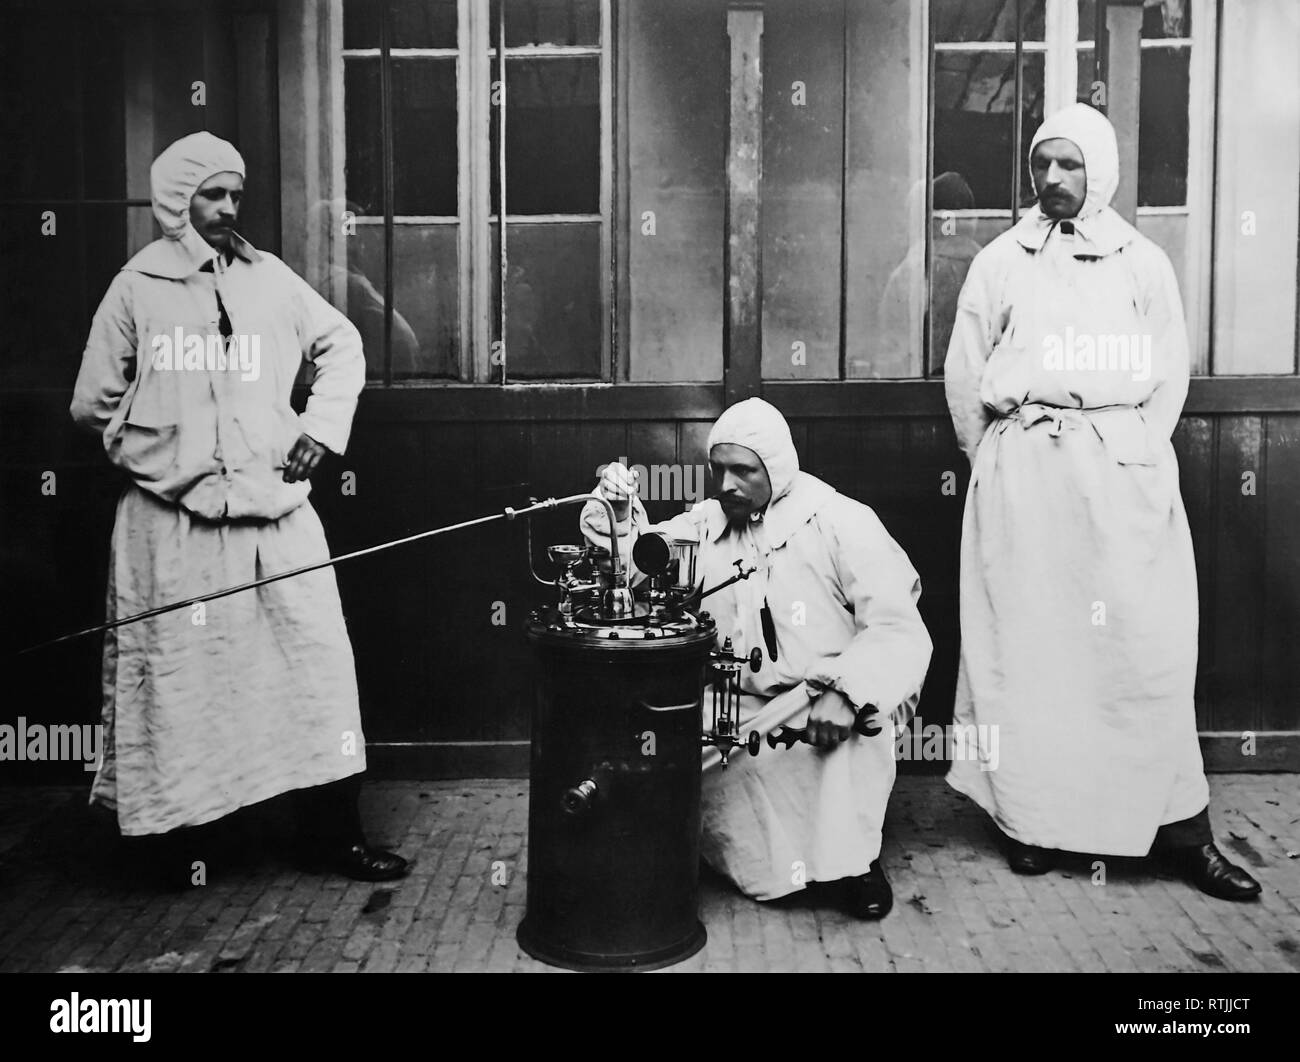 1910 photograph showing mobile disinfection team for disinfecting clothing of emigrants emigrating to the United States in the Antwerp port, Belgium Stock Photo